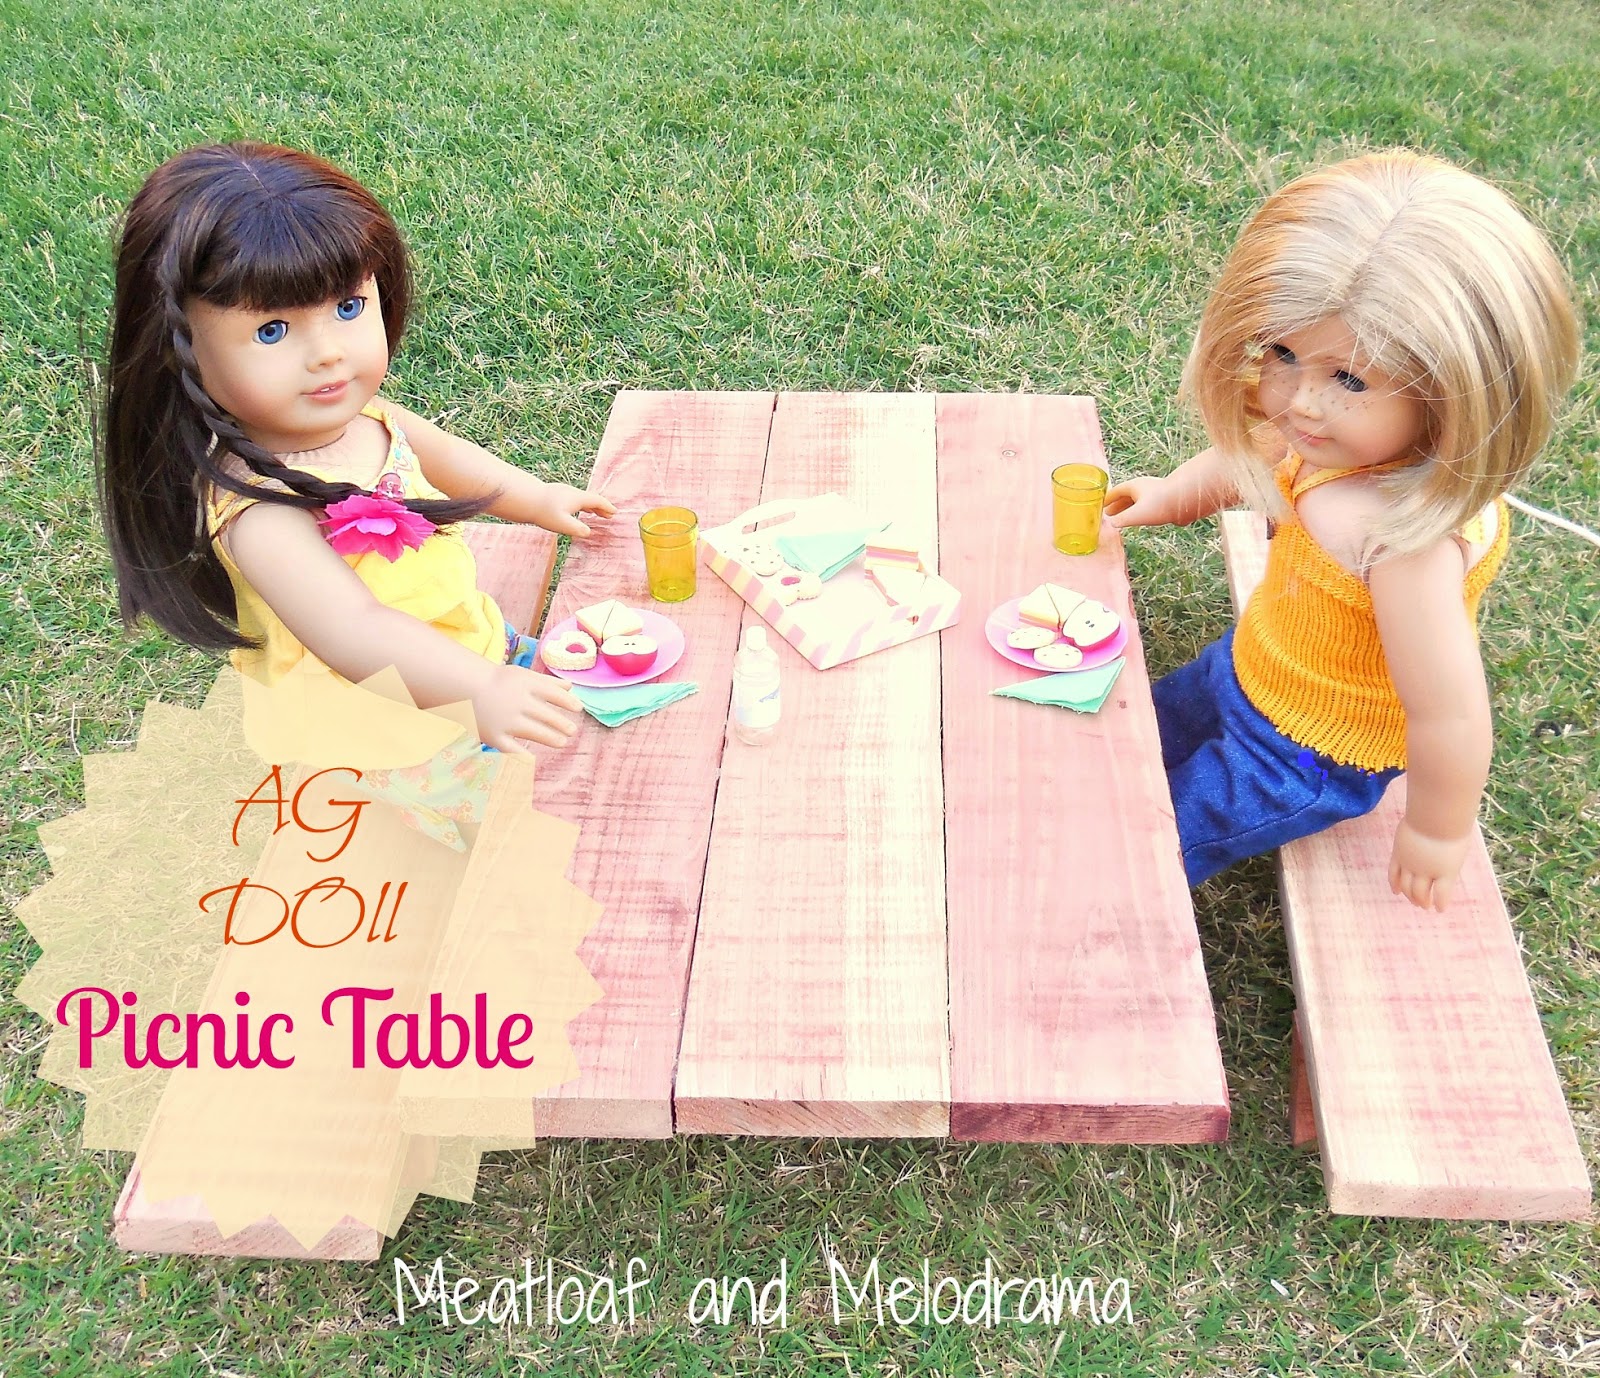 American girl dolls sitting at DIY wooden picnic table